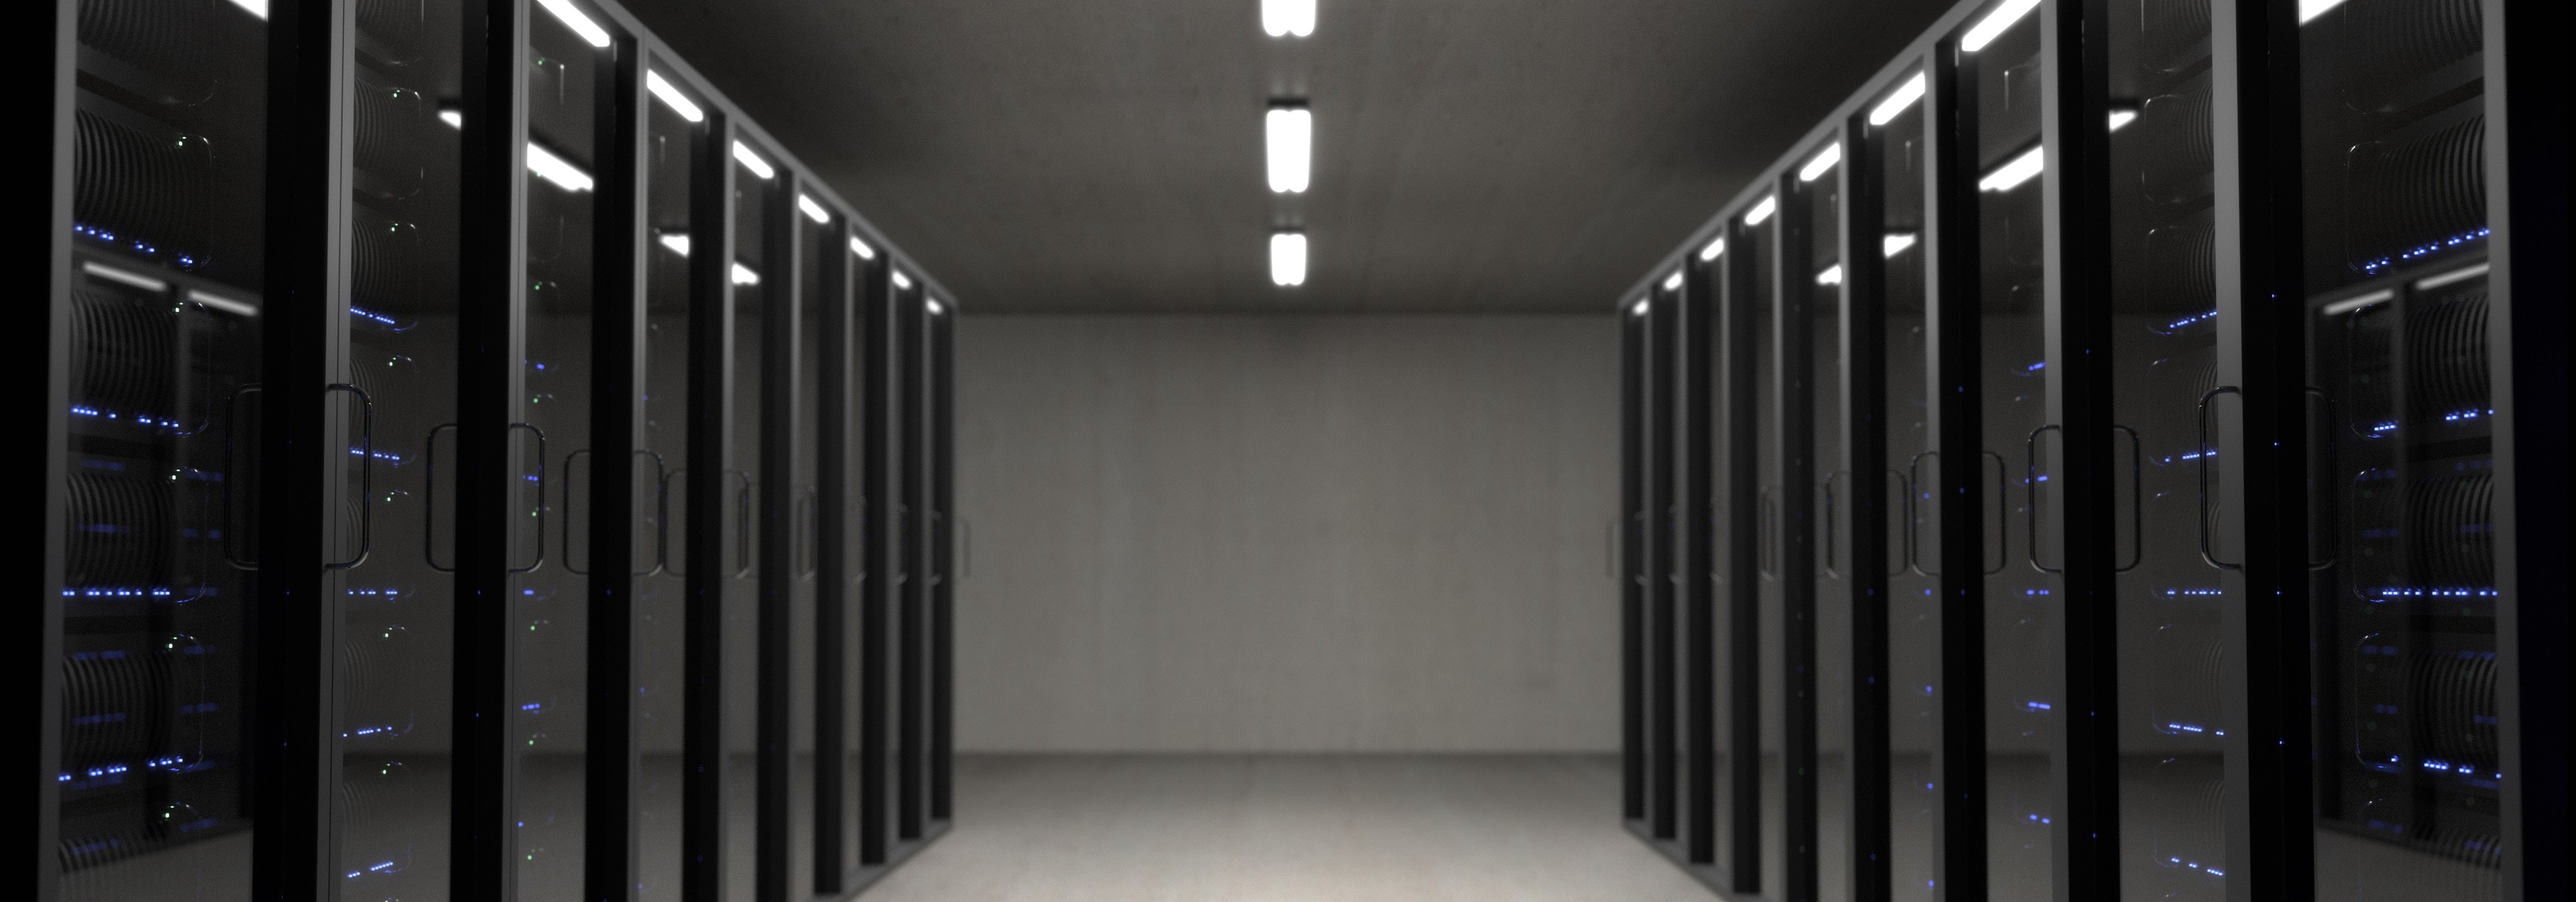 a picture of a data center, where computer servers are placed